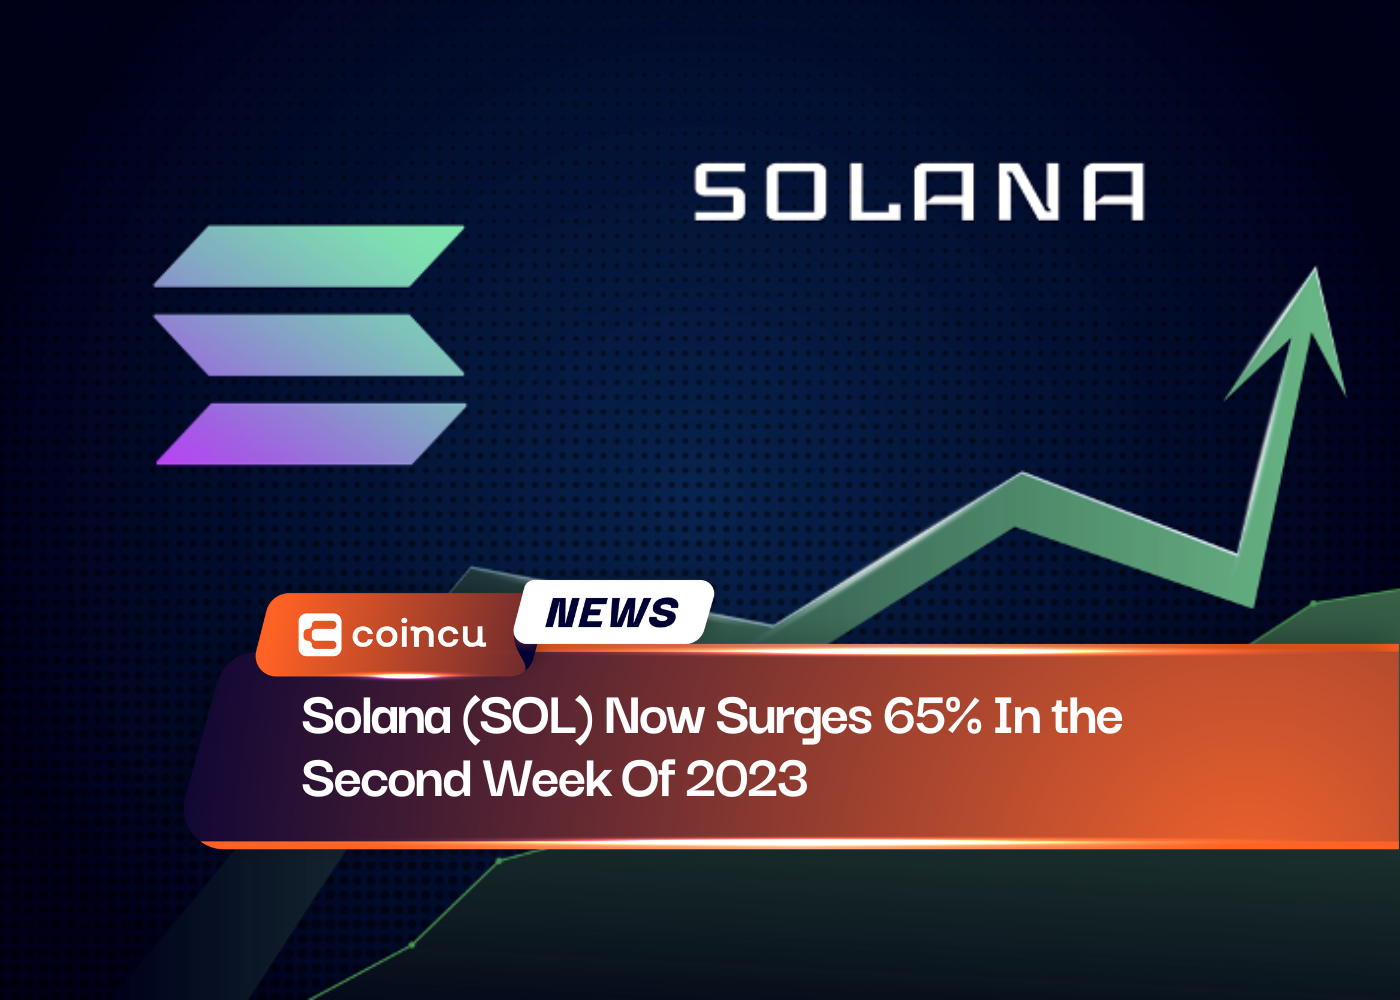 Solana (SOL) Now Surges 65% In the Second Week Of 2023